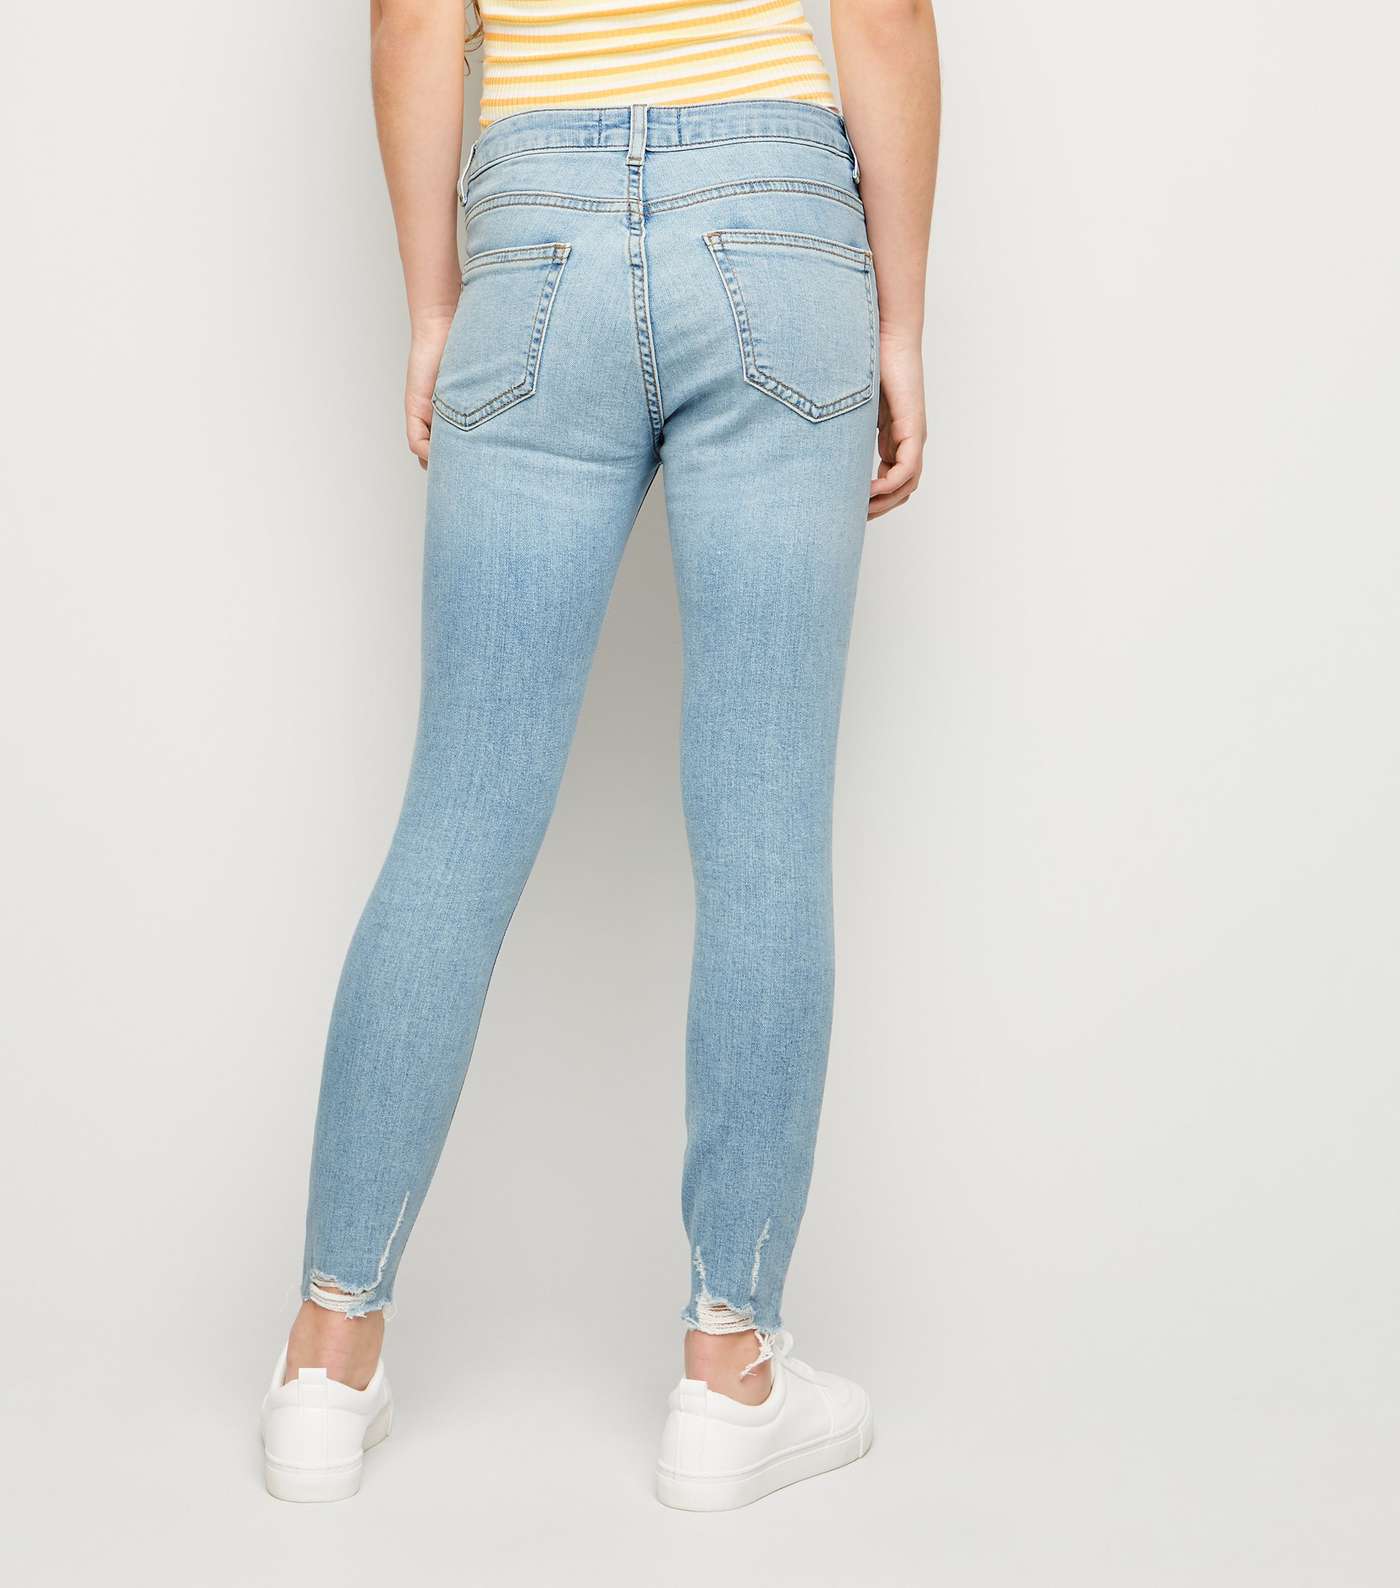 Girls Pale Blue Ripped Skinny Jeans Image 3